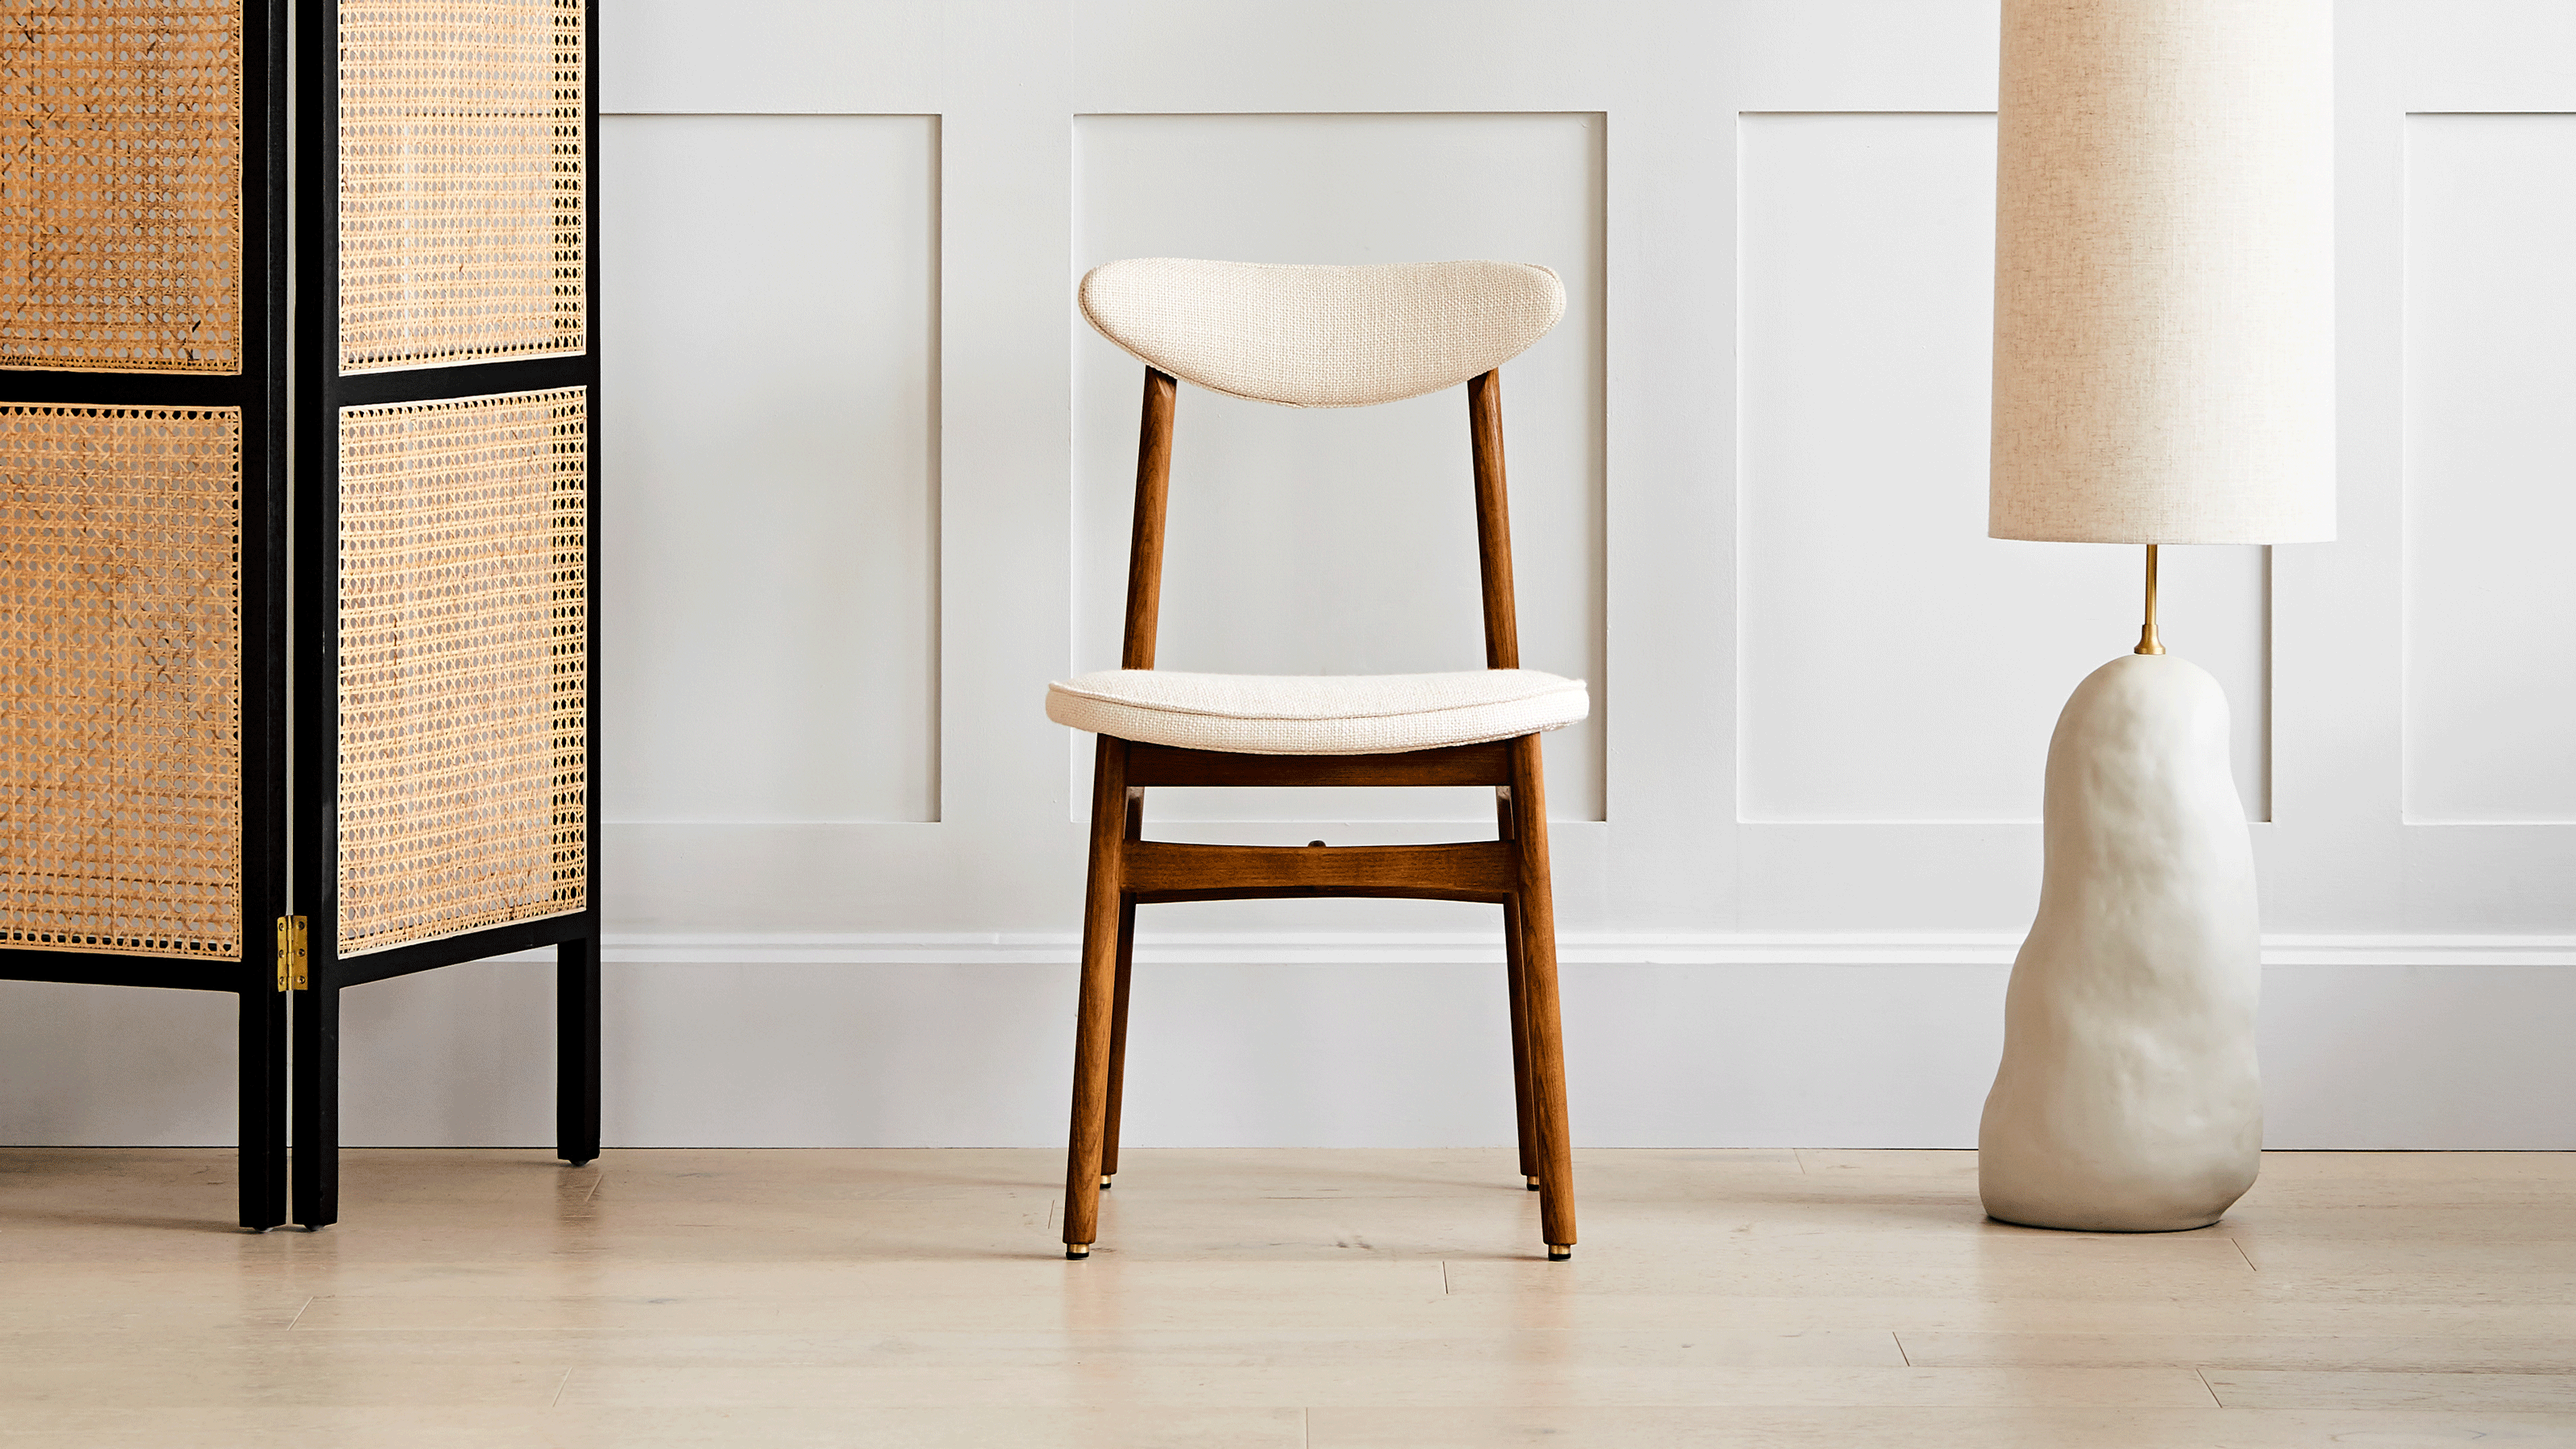 mid-century dining chair with lamp and rattan divider against wall panelling